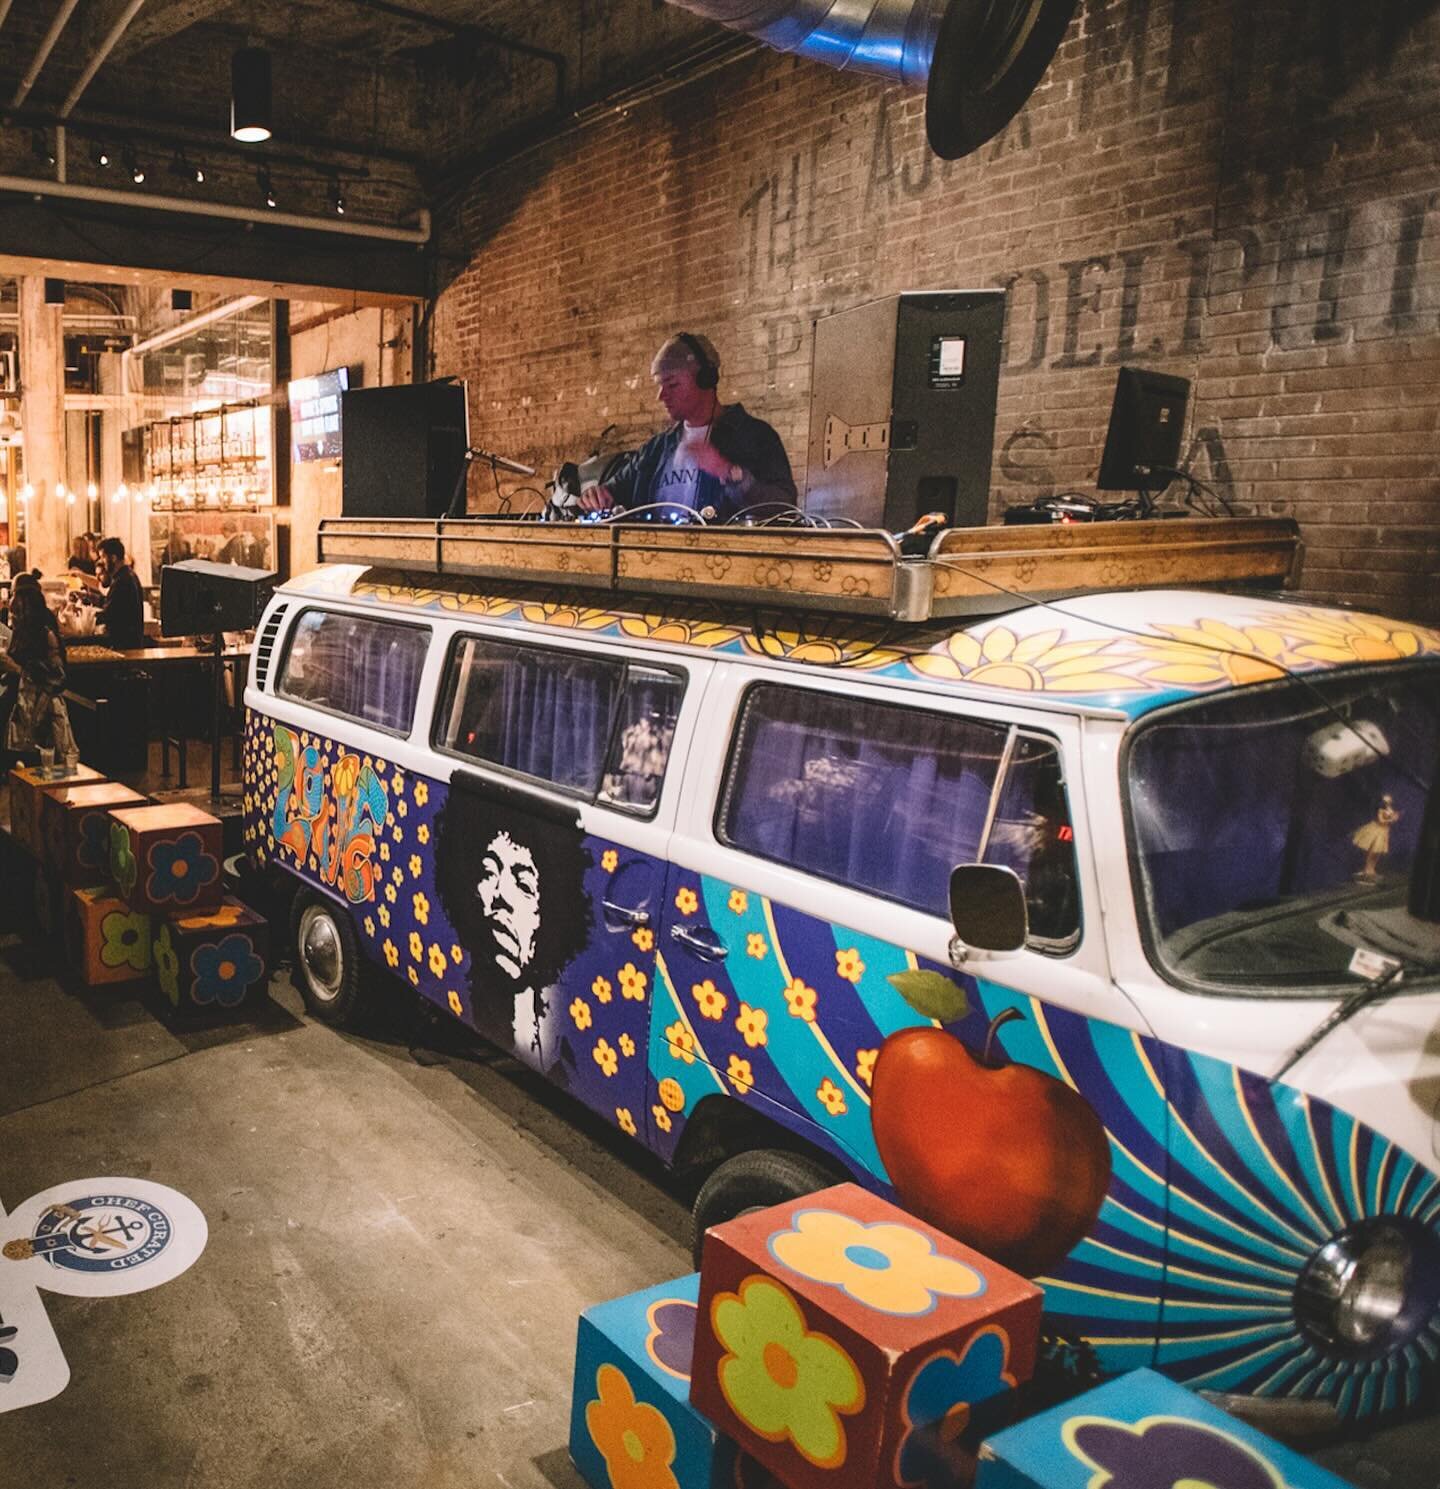 Elevating expectations through unexpected details is what we do best. We like to think outside of the box, or in this case, the van! To wow the audience from a new angle, we threw @pierson_dj on top of a vintage VW bus at the Beats &lsquo;n Eats Afte